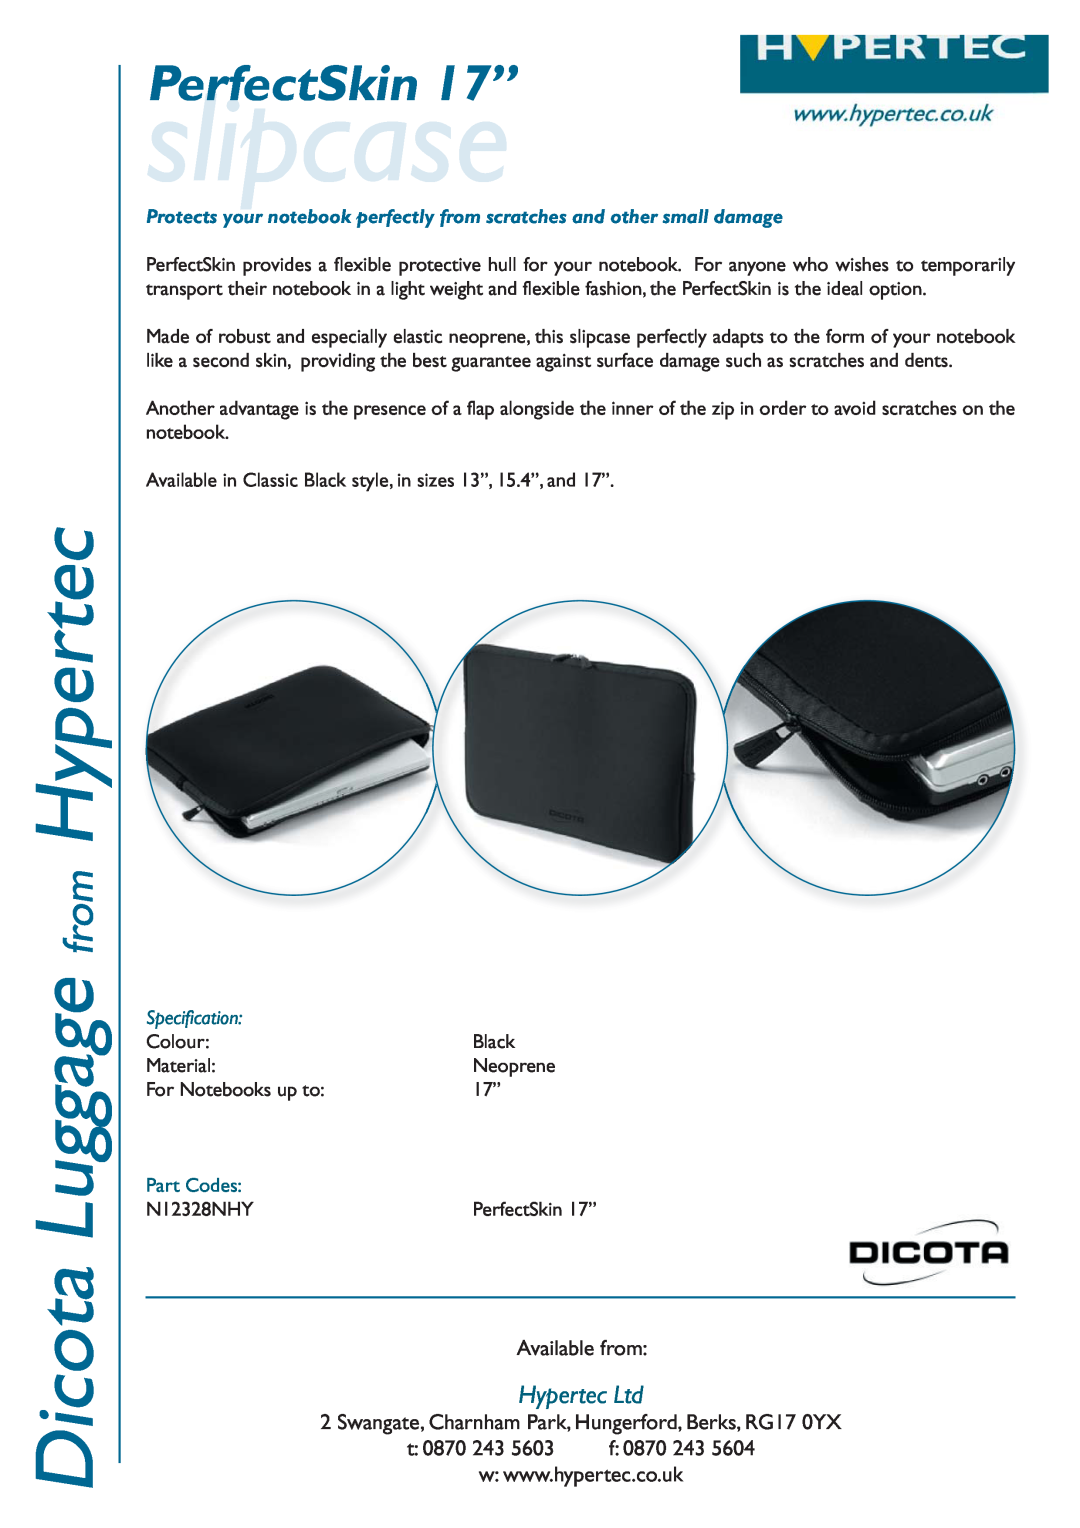 Hypertec N12328NHY manual slipcase, Dicota Luggage from Hypertec, PerfectSkin 17‰, Available from, t 0870, Specification 